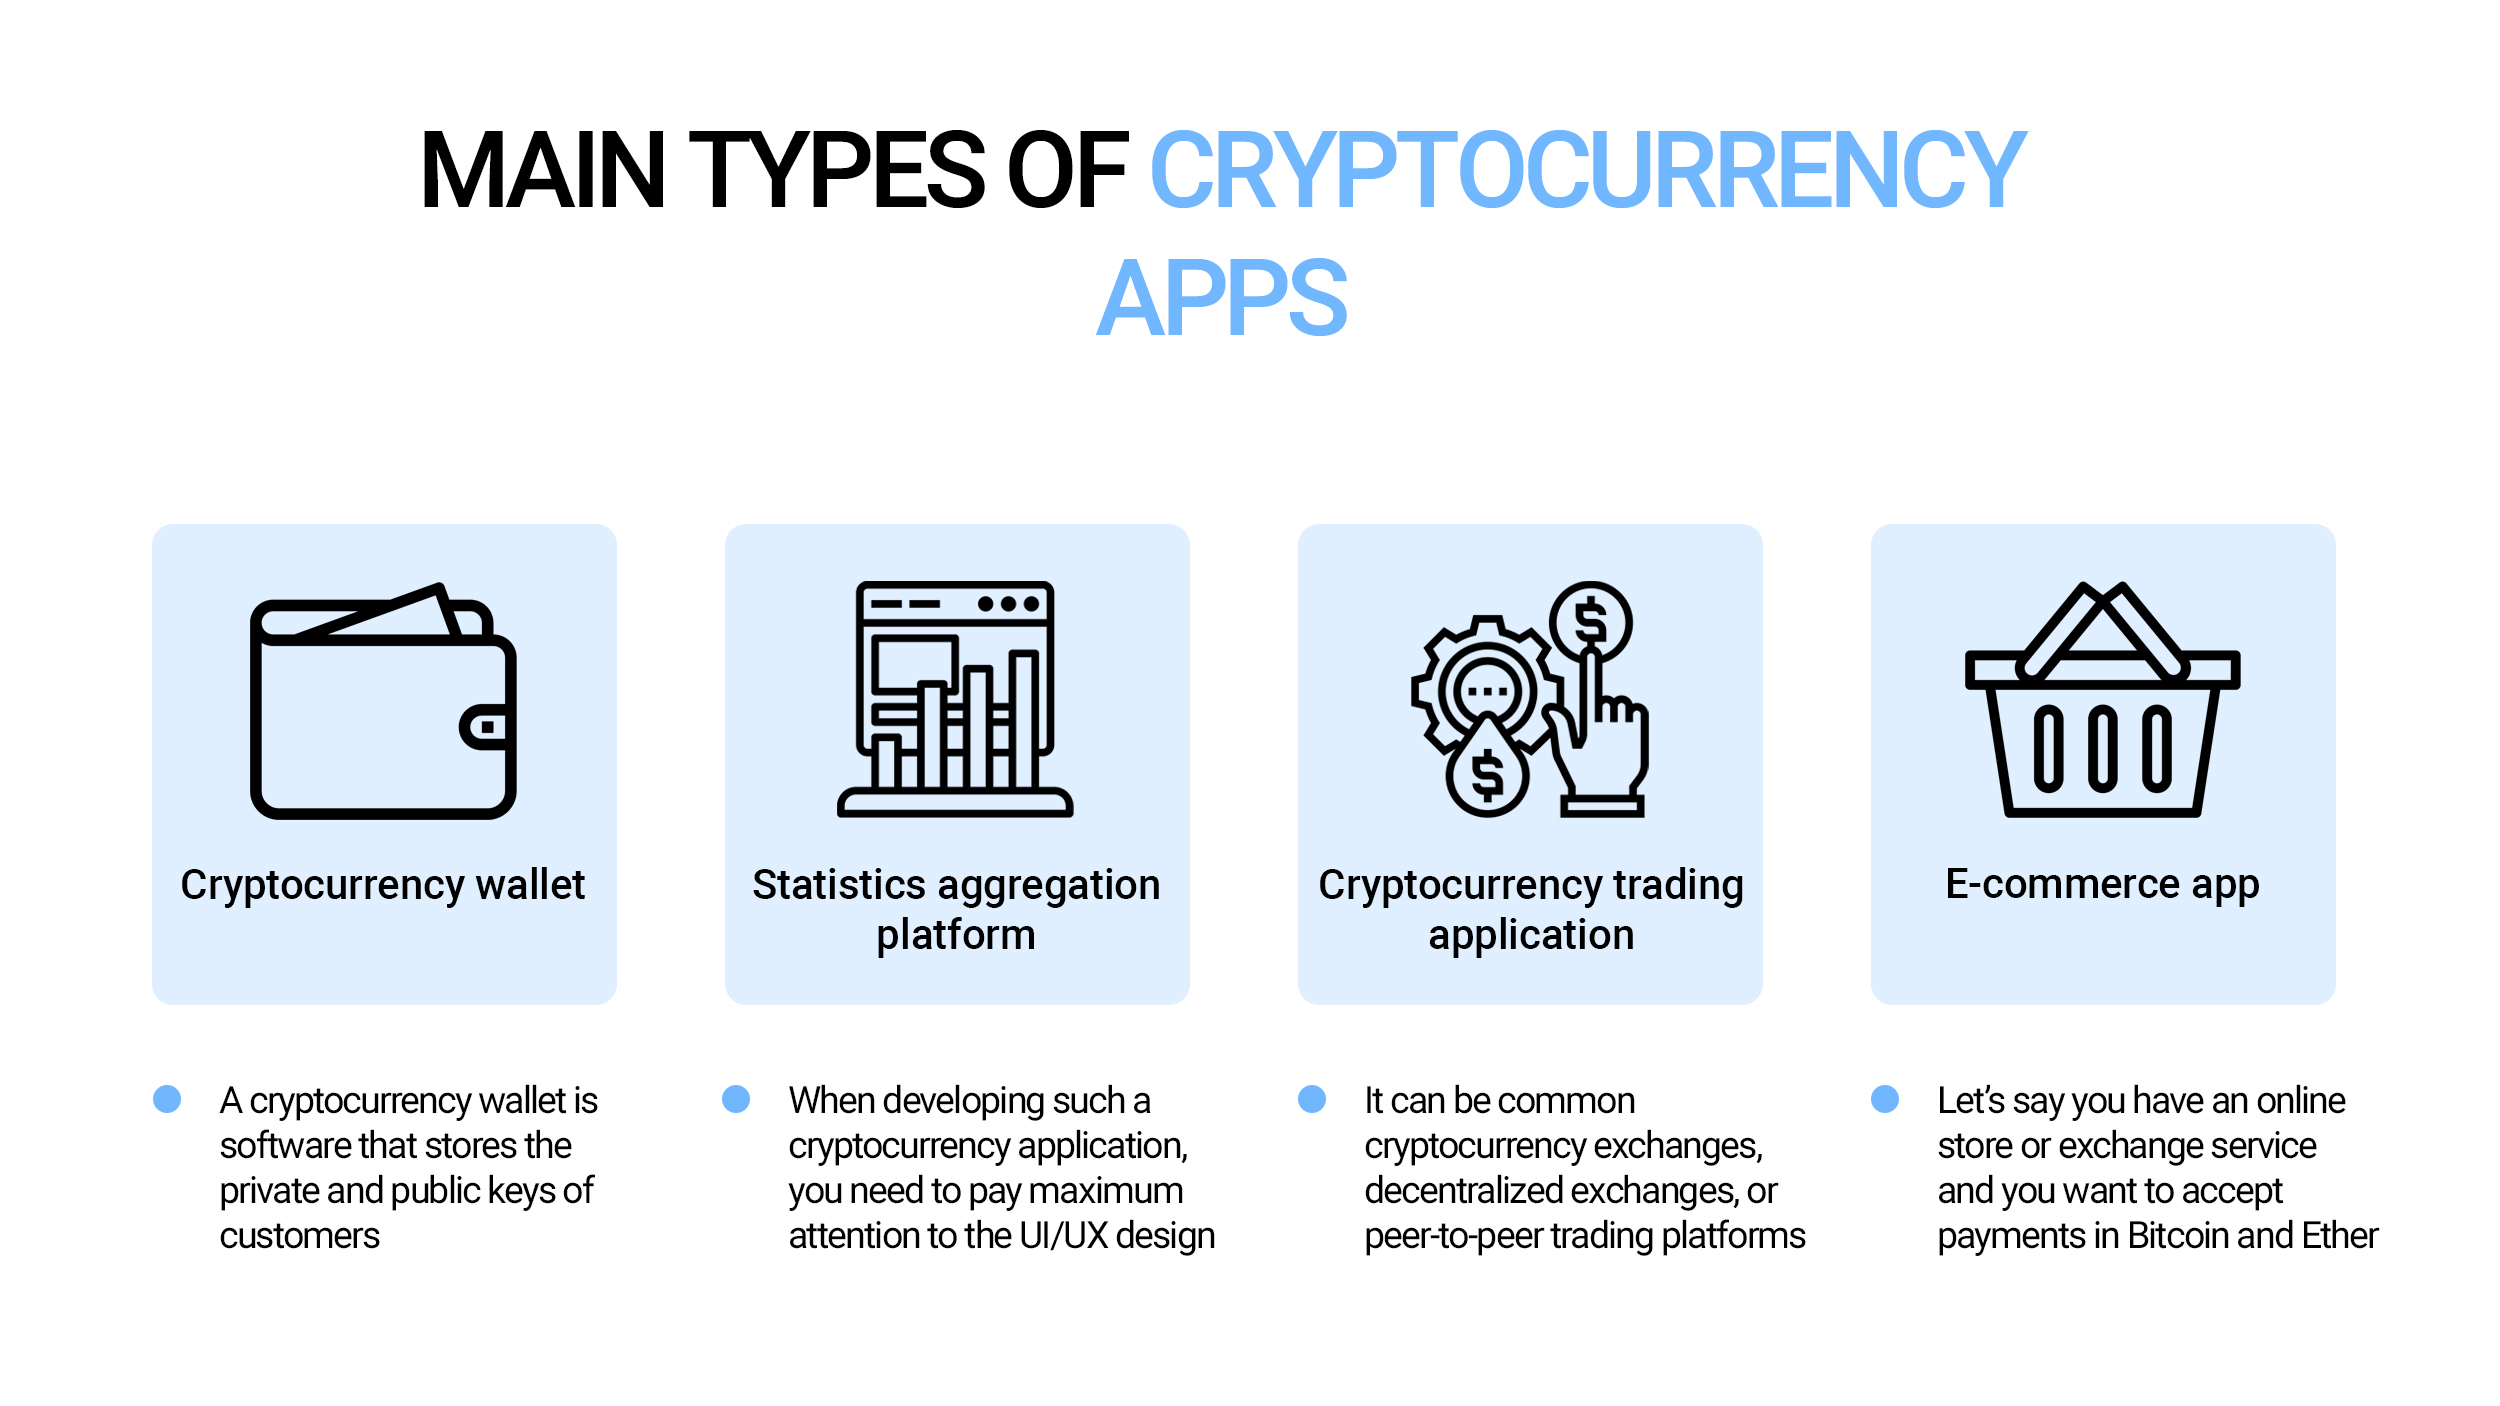 Main types of cryptocurrency apps